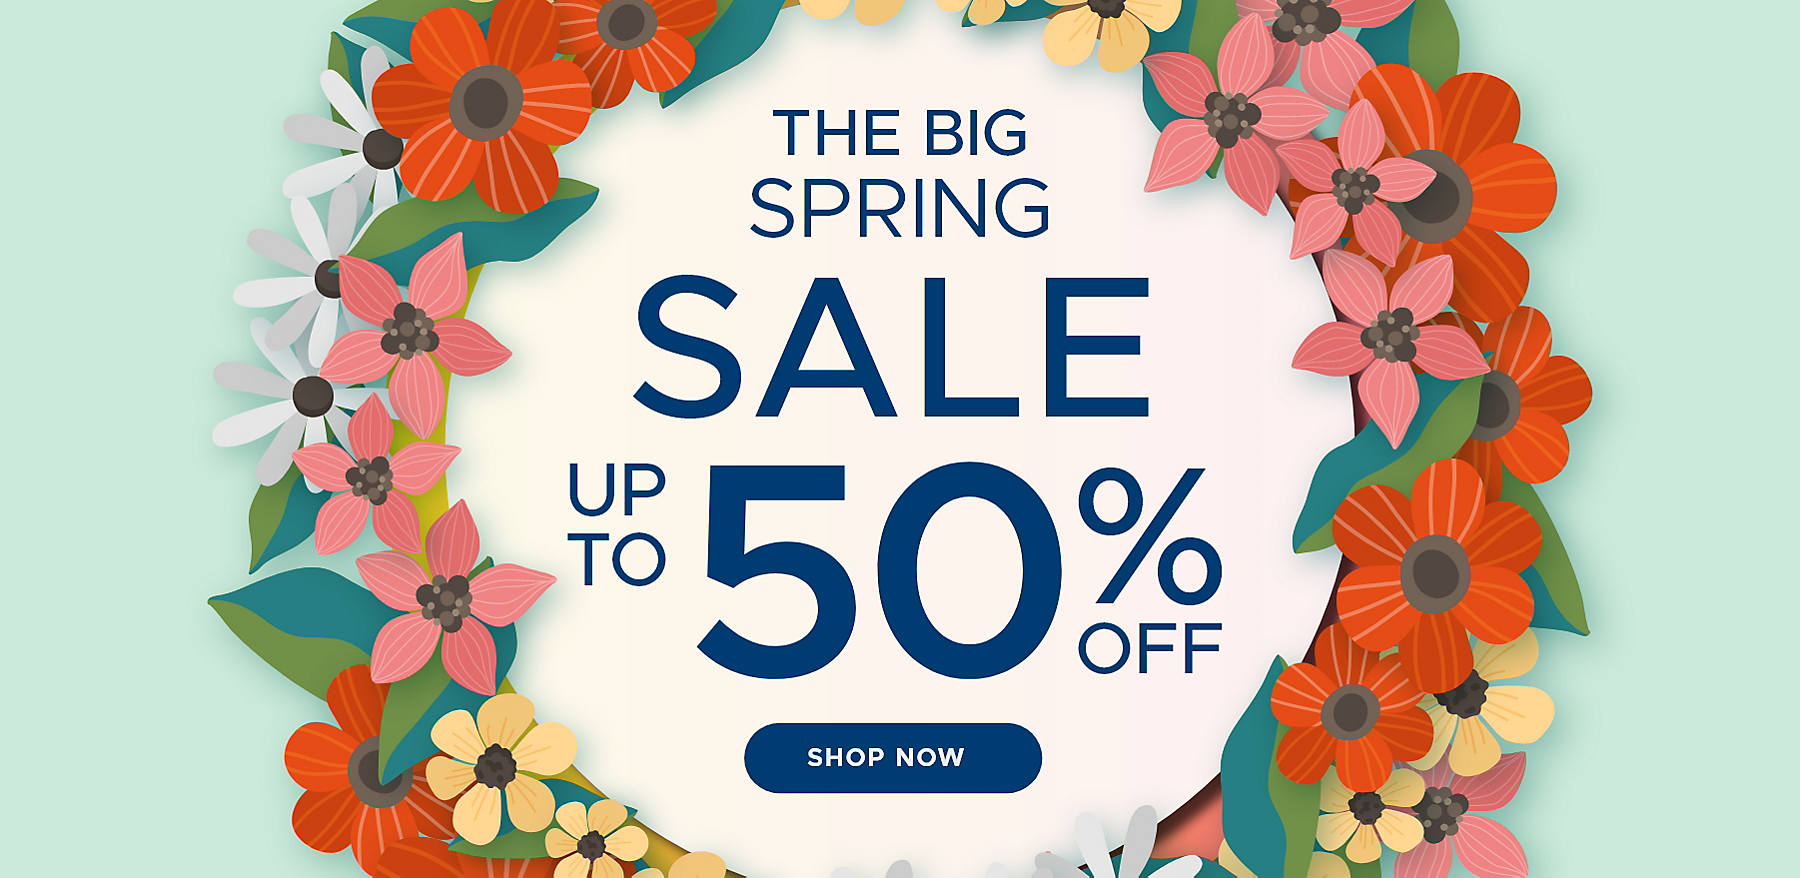 The Big Spring Sale up to 50% off shop now